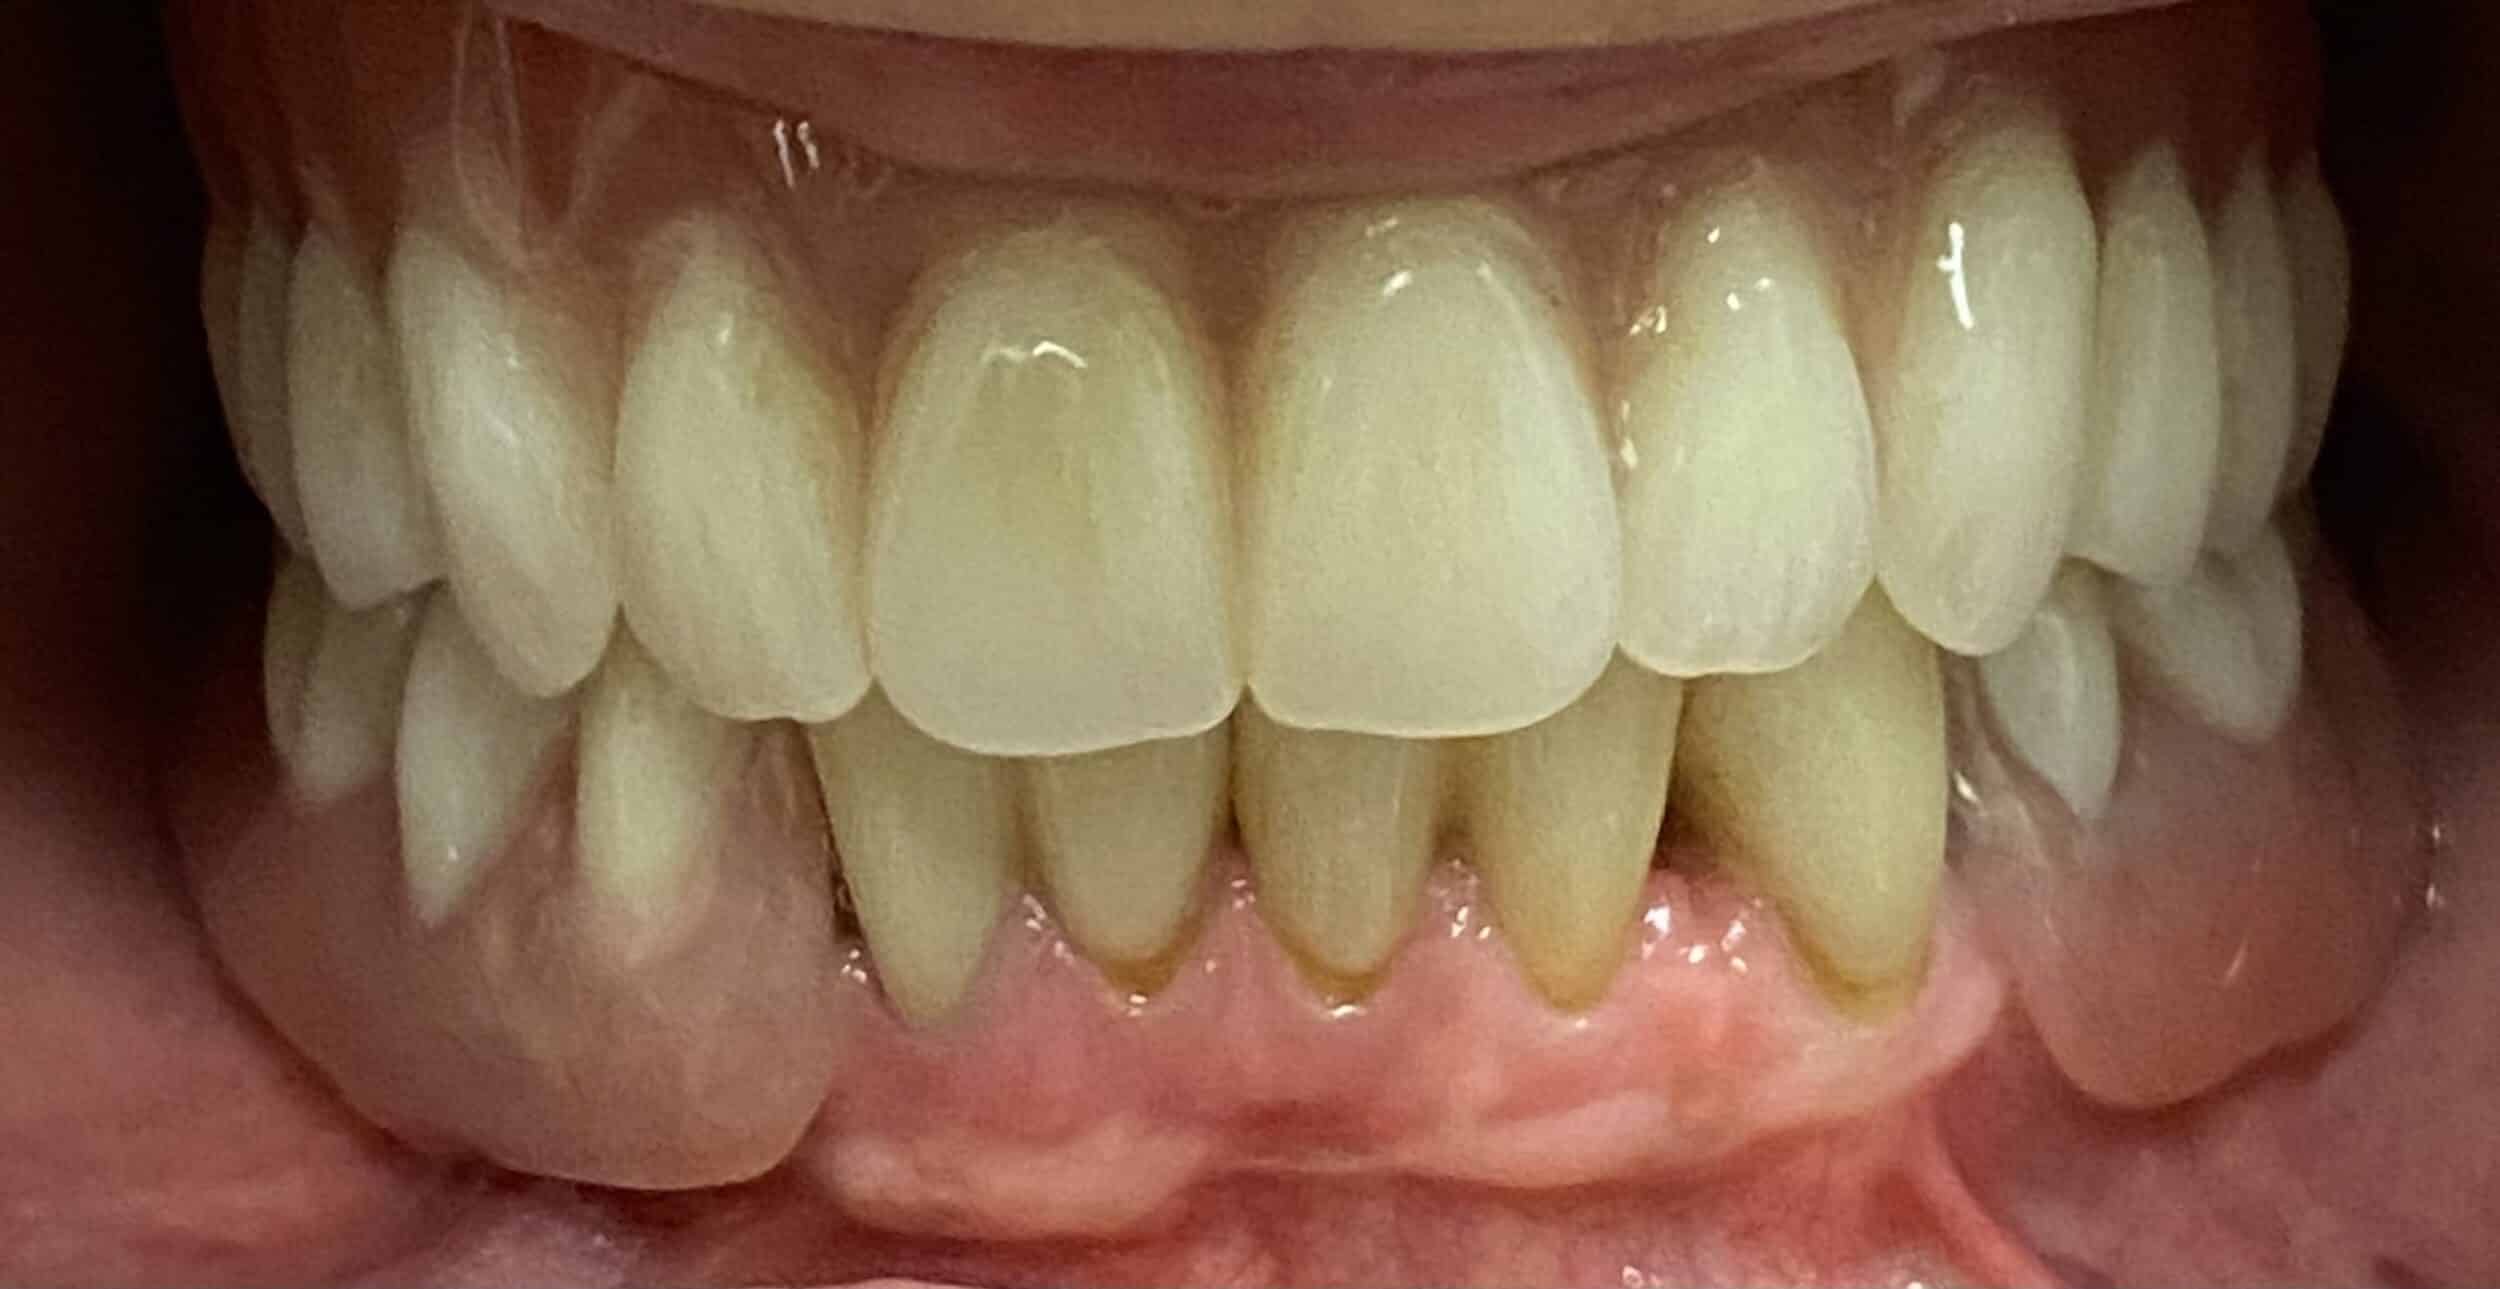 Implant Supported Partial Denture in Place. scaled